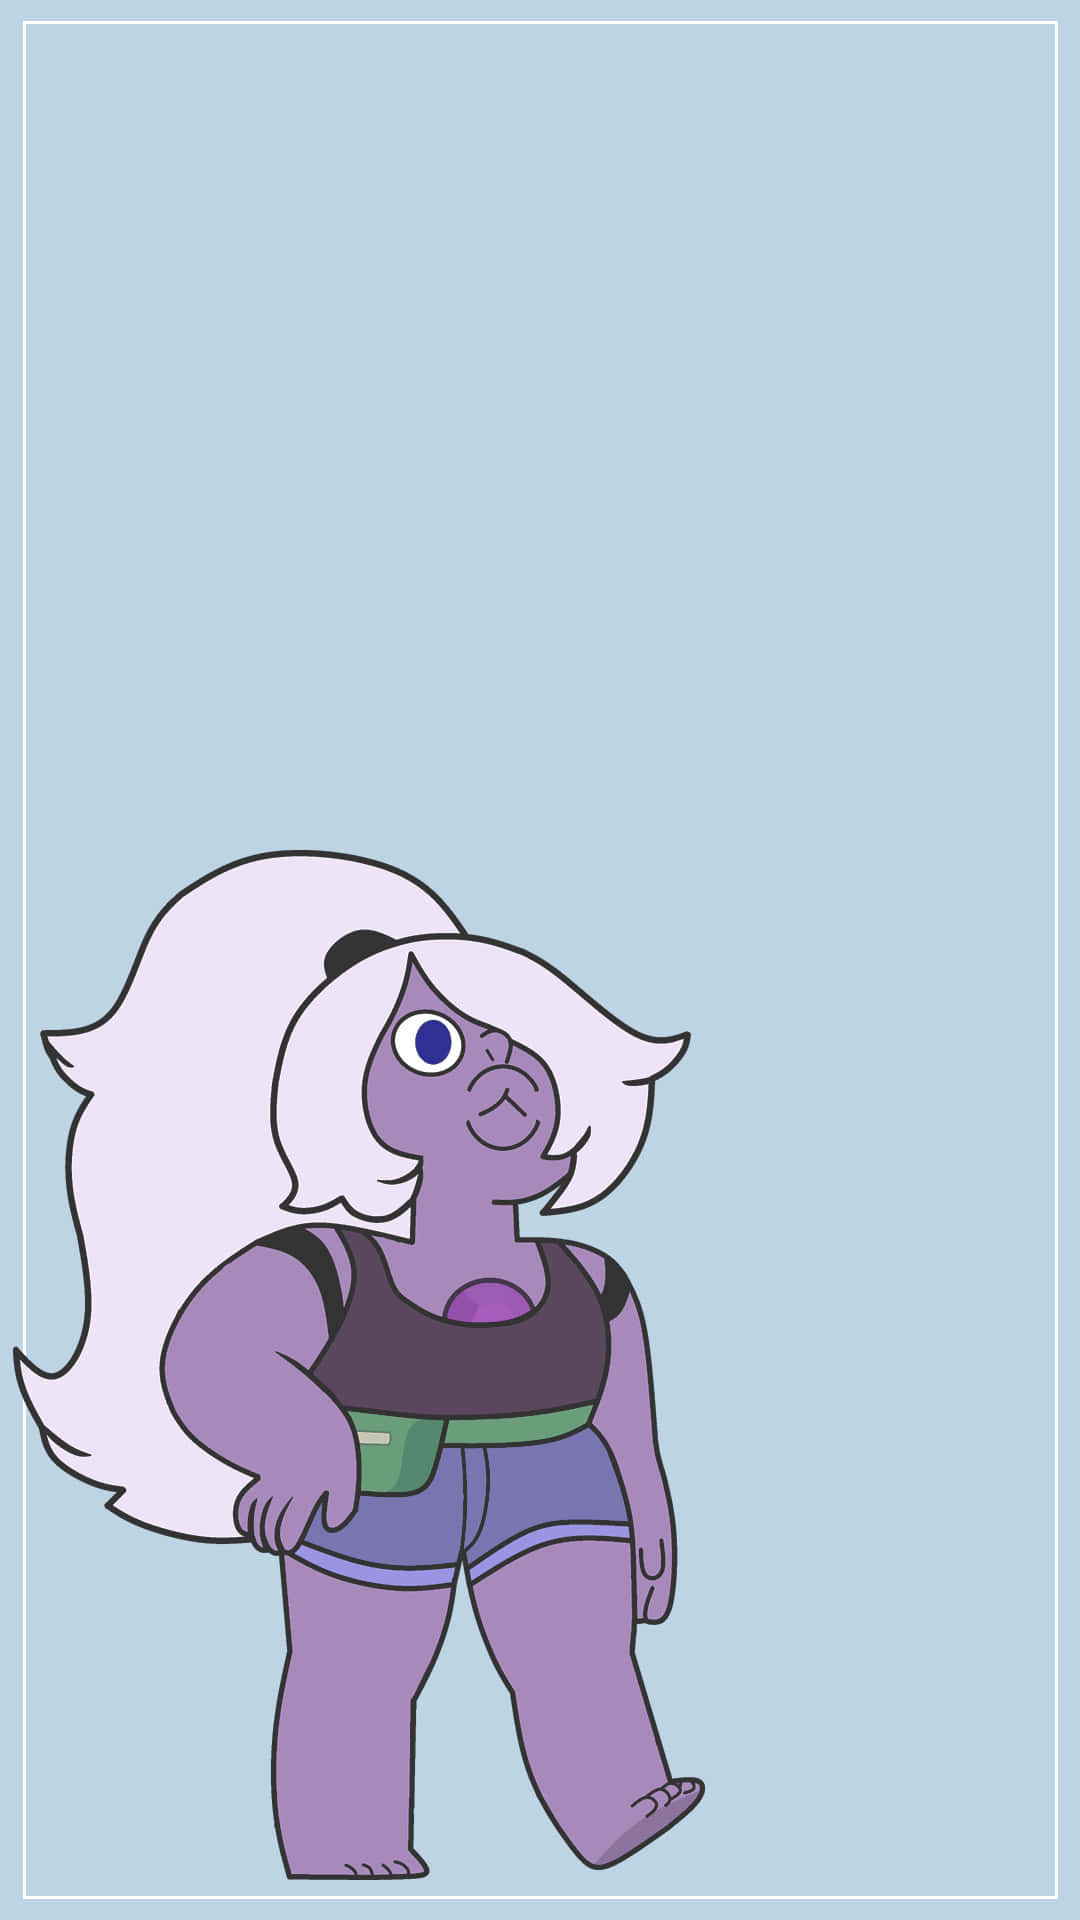 Get the latest in high-tech with the Steven Universe Phone. Wallpaper